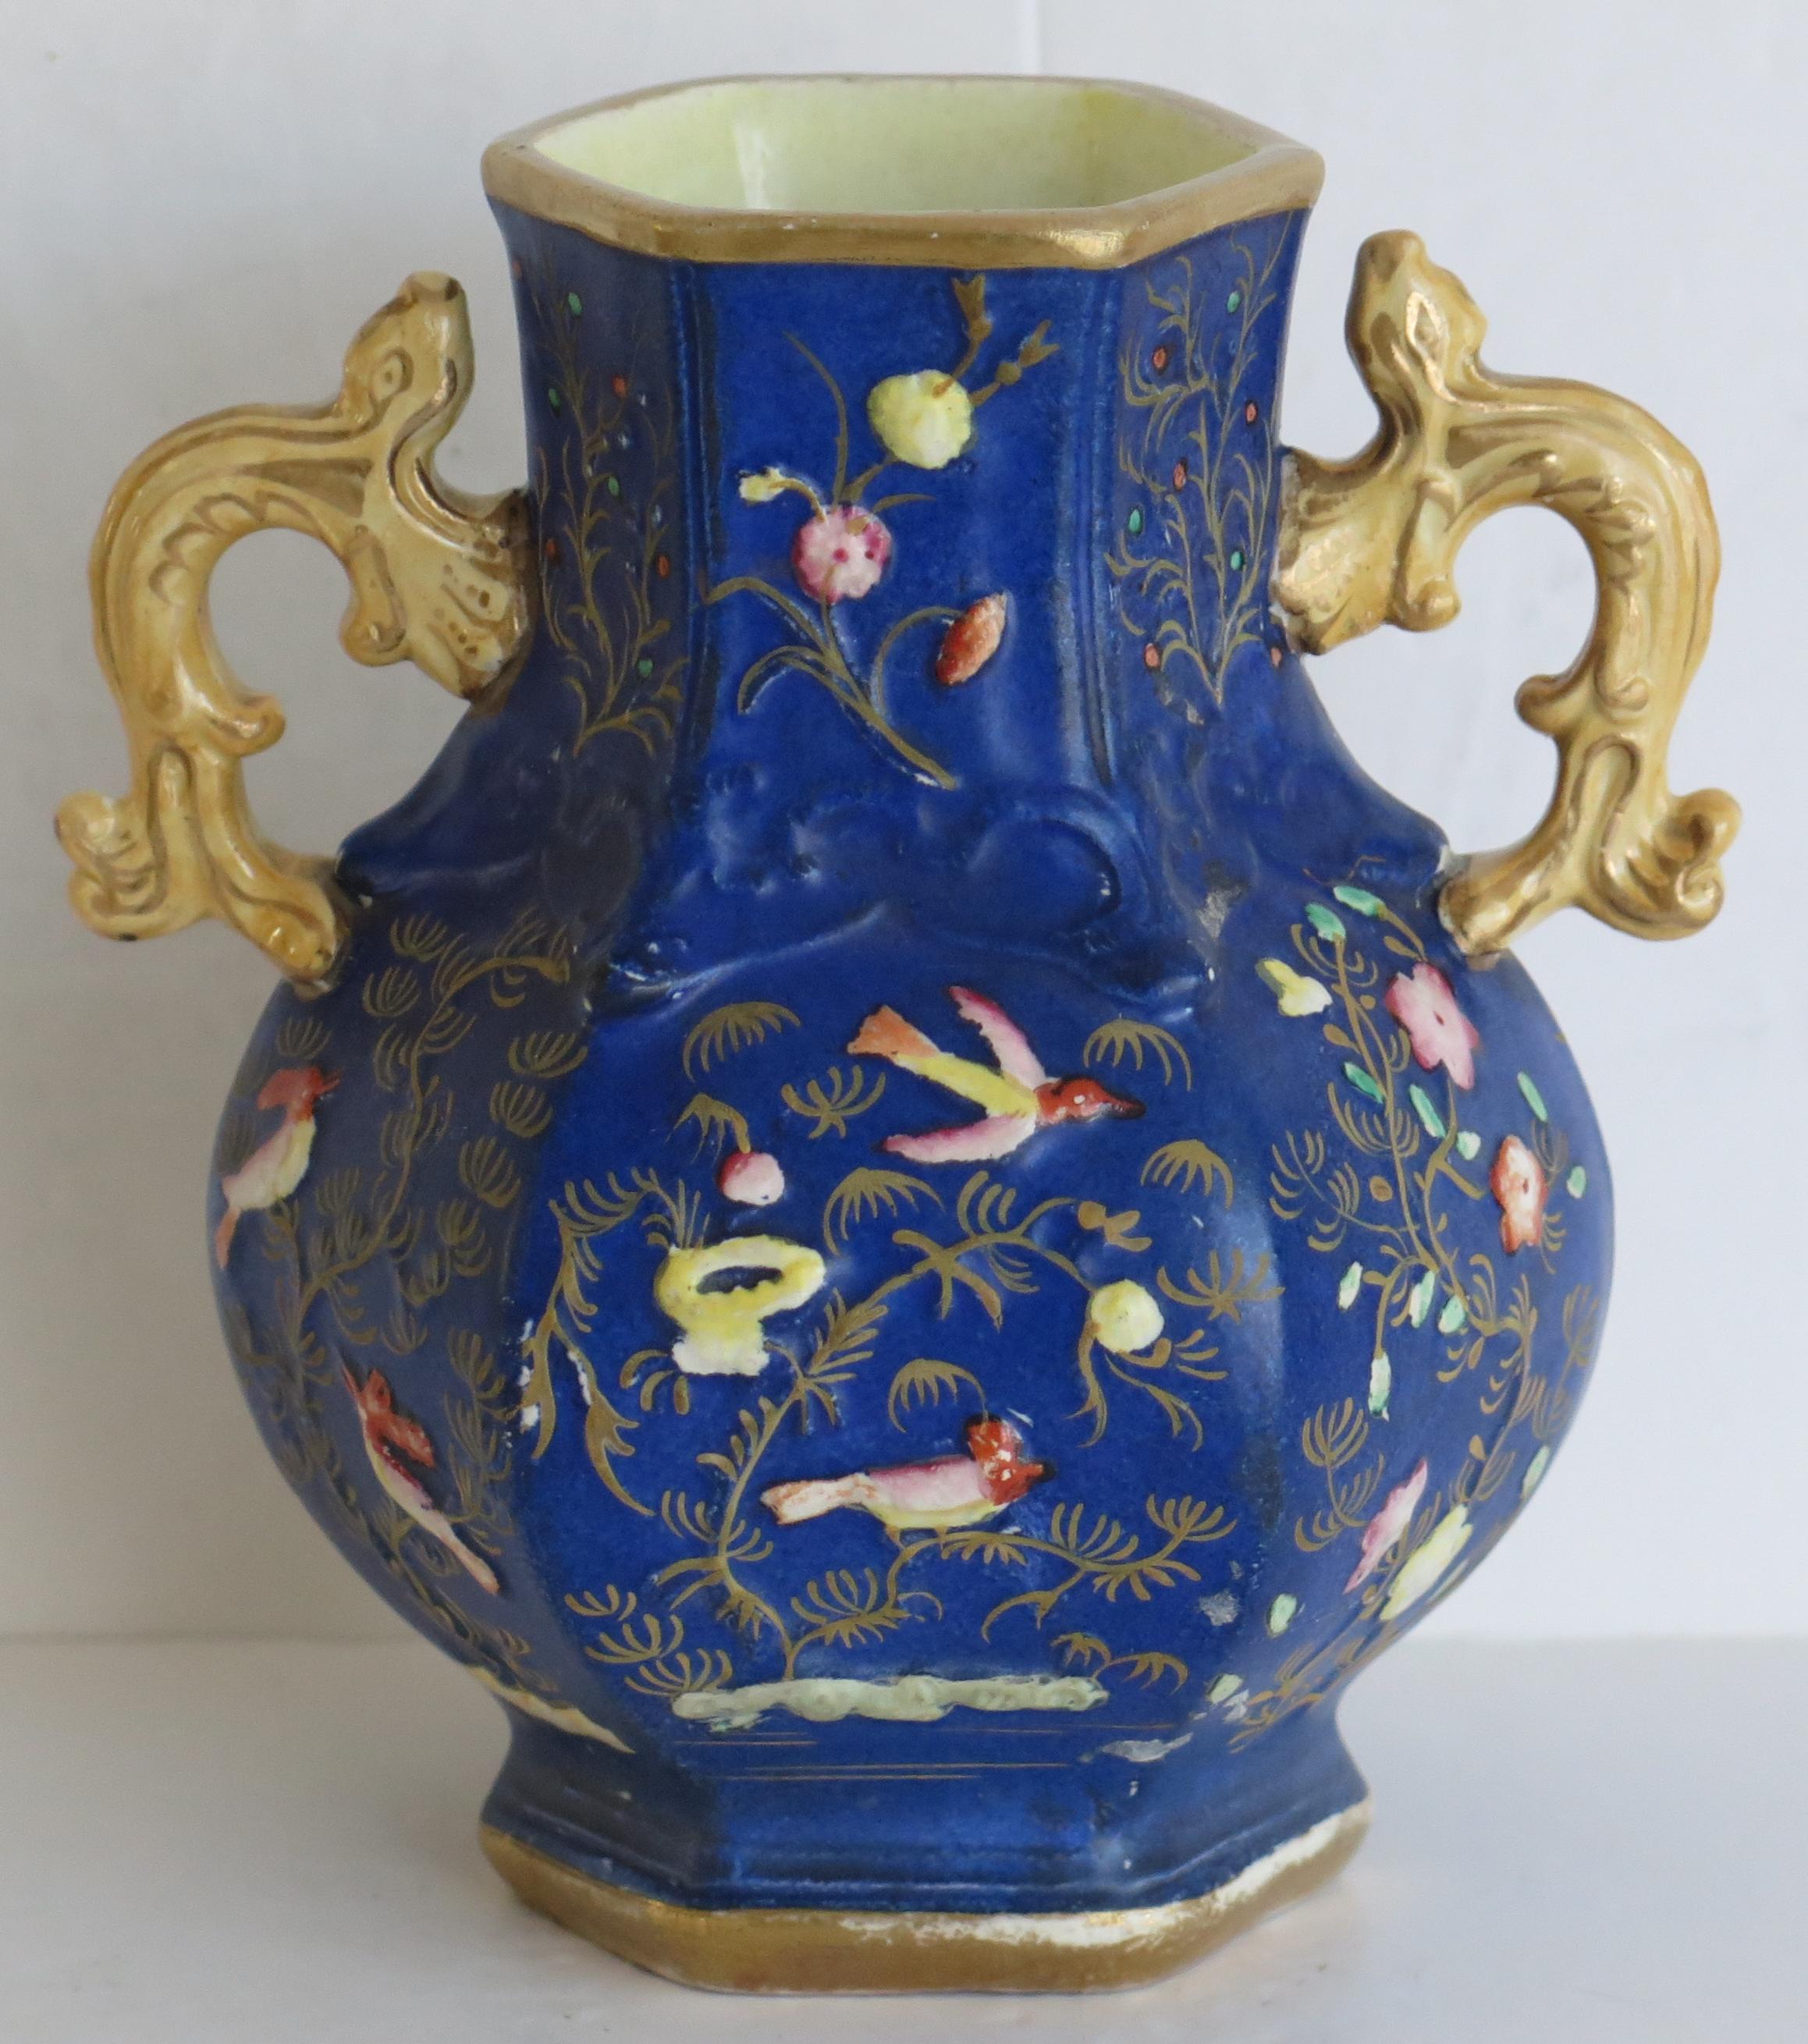 This is a rare ironstone vase, made by the Mason's factory in the early 19th century.

The vase is hexagonal in section with a baluster shape and two salamander handles, one either side.

The vase has a relief moulded pattern which is rare. The